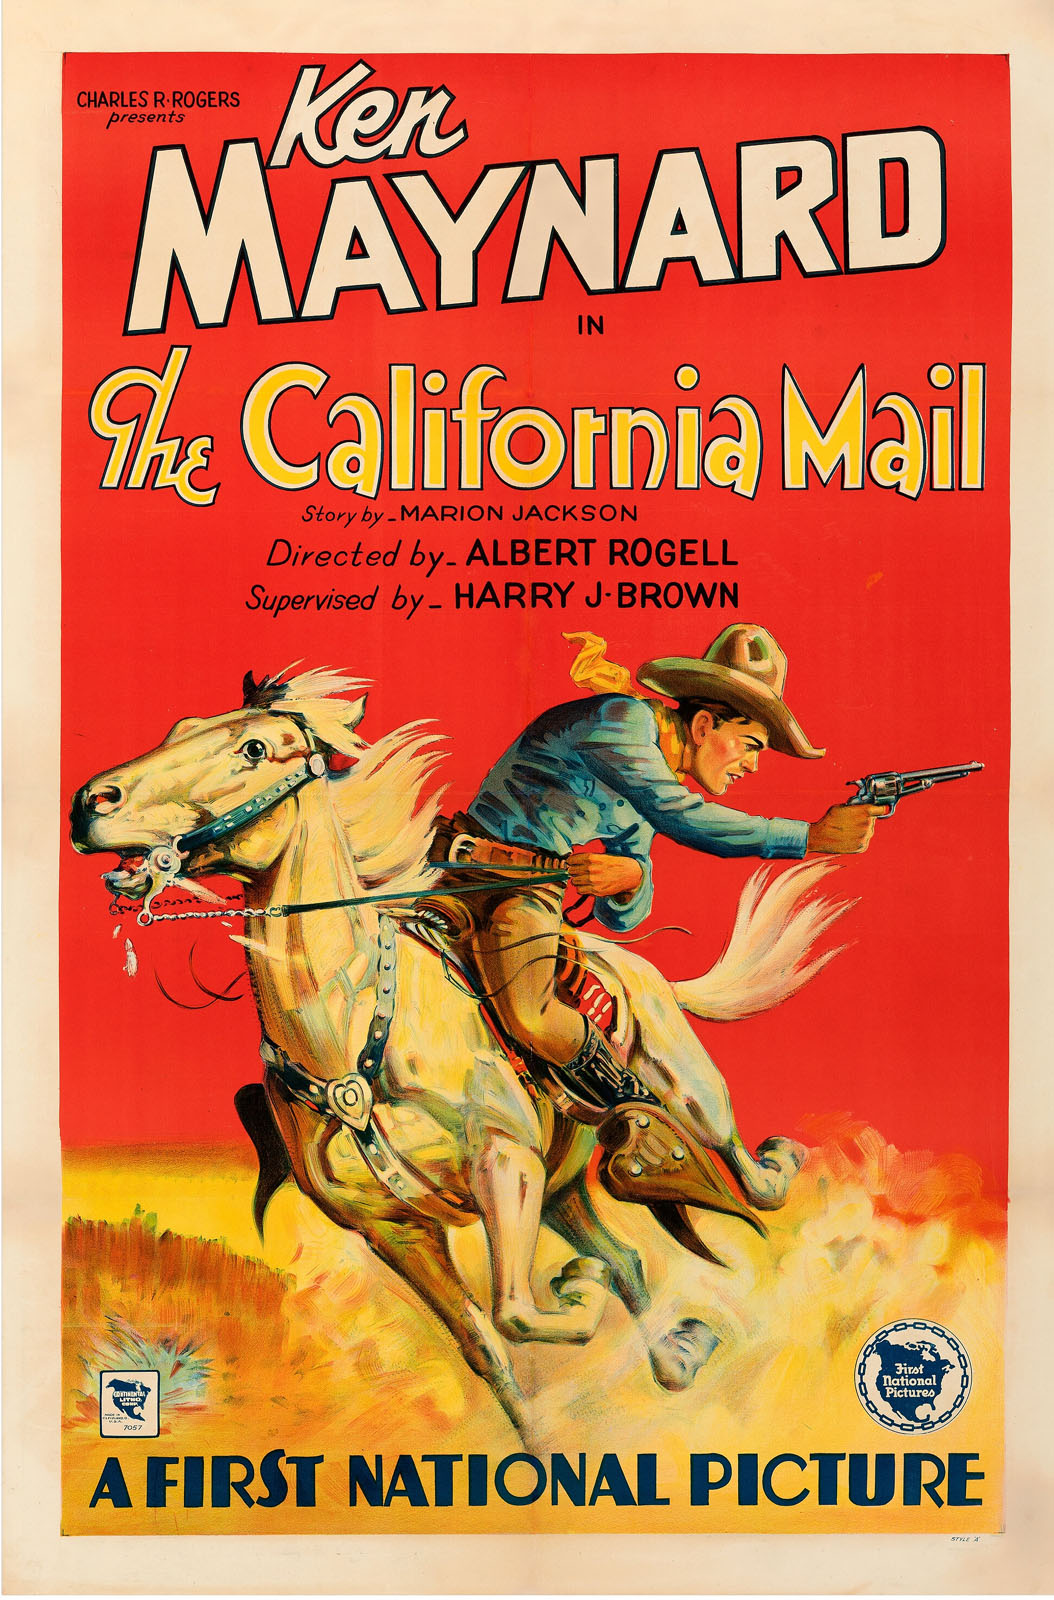 CALIFORNIA MAIL, THE